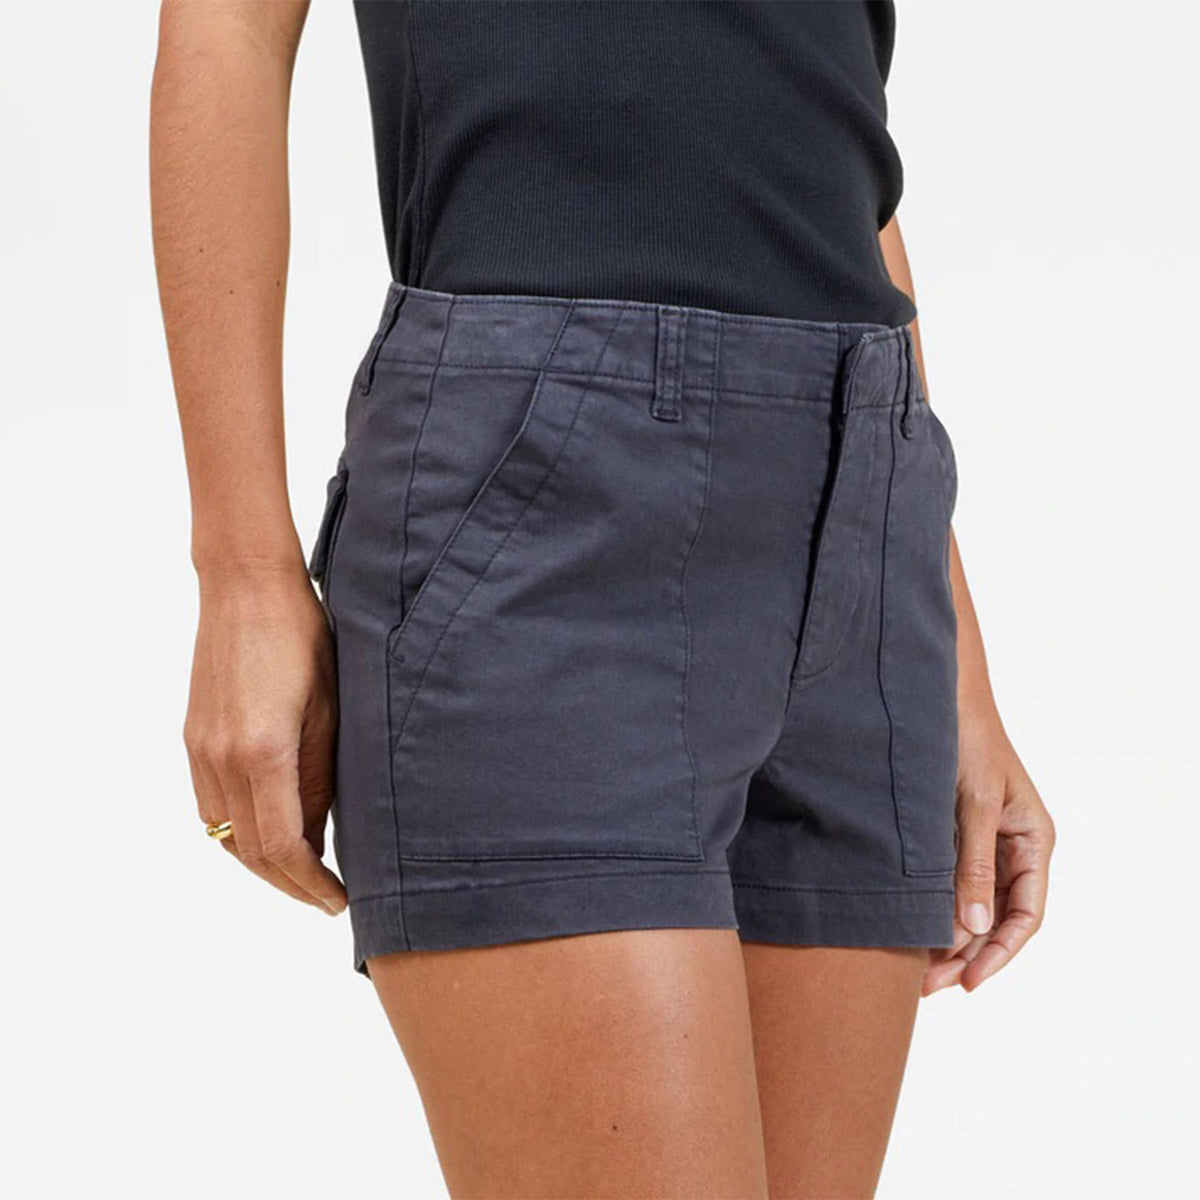 Hero image featuring the front of the Outerknown Women's Emory shorts in black